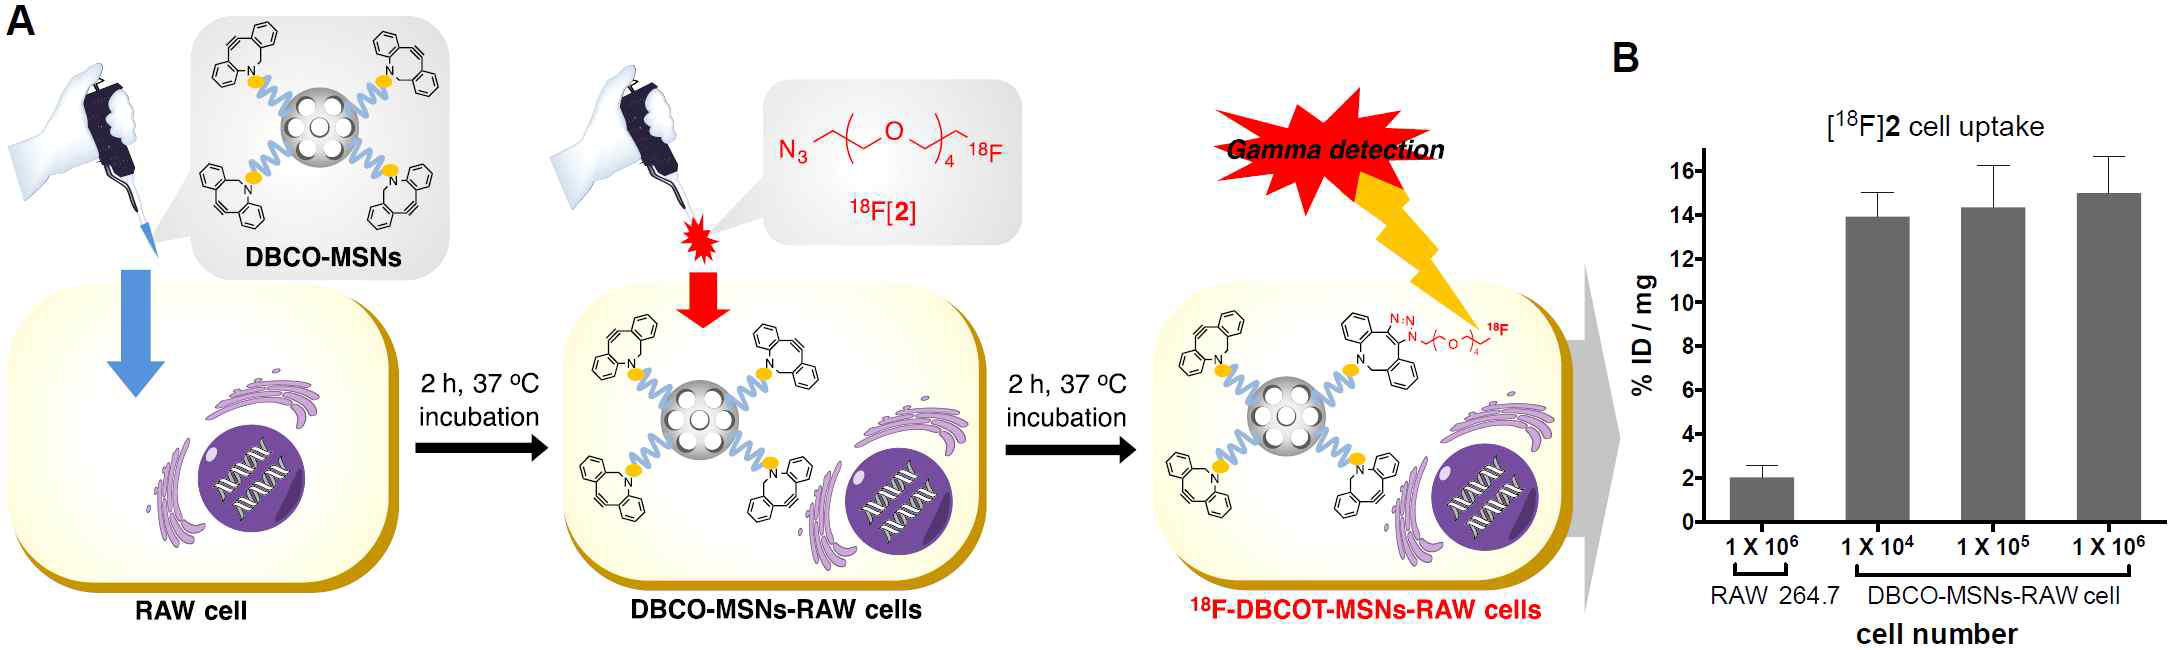 (A and B) In vitro 18F-labeling reaction based on SPAAC in DBCO-MSNs loaded RAW 264.7 cells. Uptake of 18F-Labeled azide([18F]2) into RAW 264.7 cells via 18F-labeling reaction based on SPAAC in DBCO-MSNs loaded RAW 264.7 living-cells; and Its schematic procedure